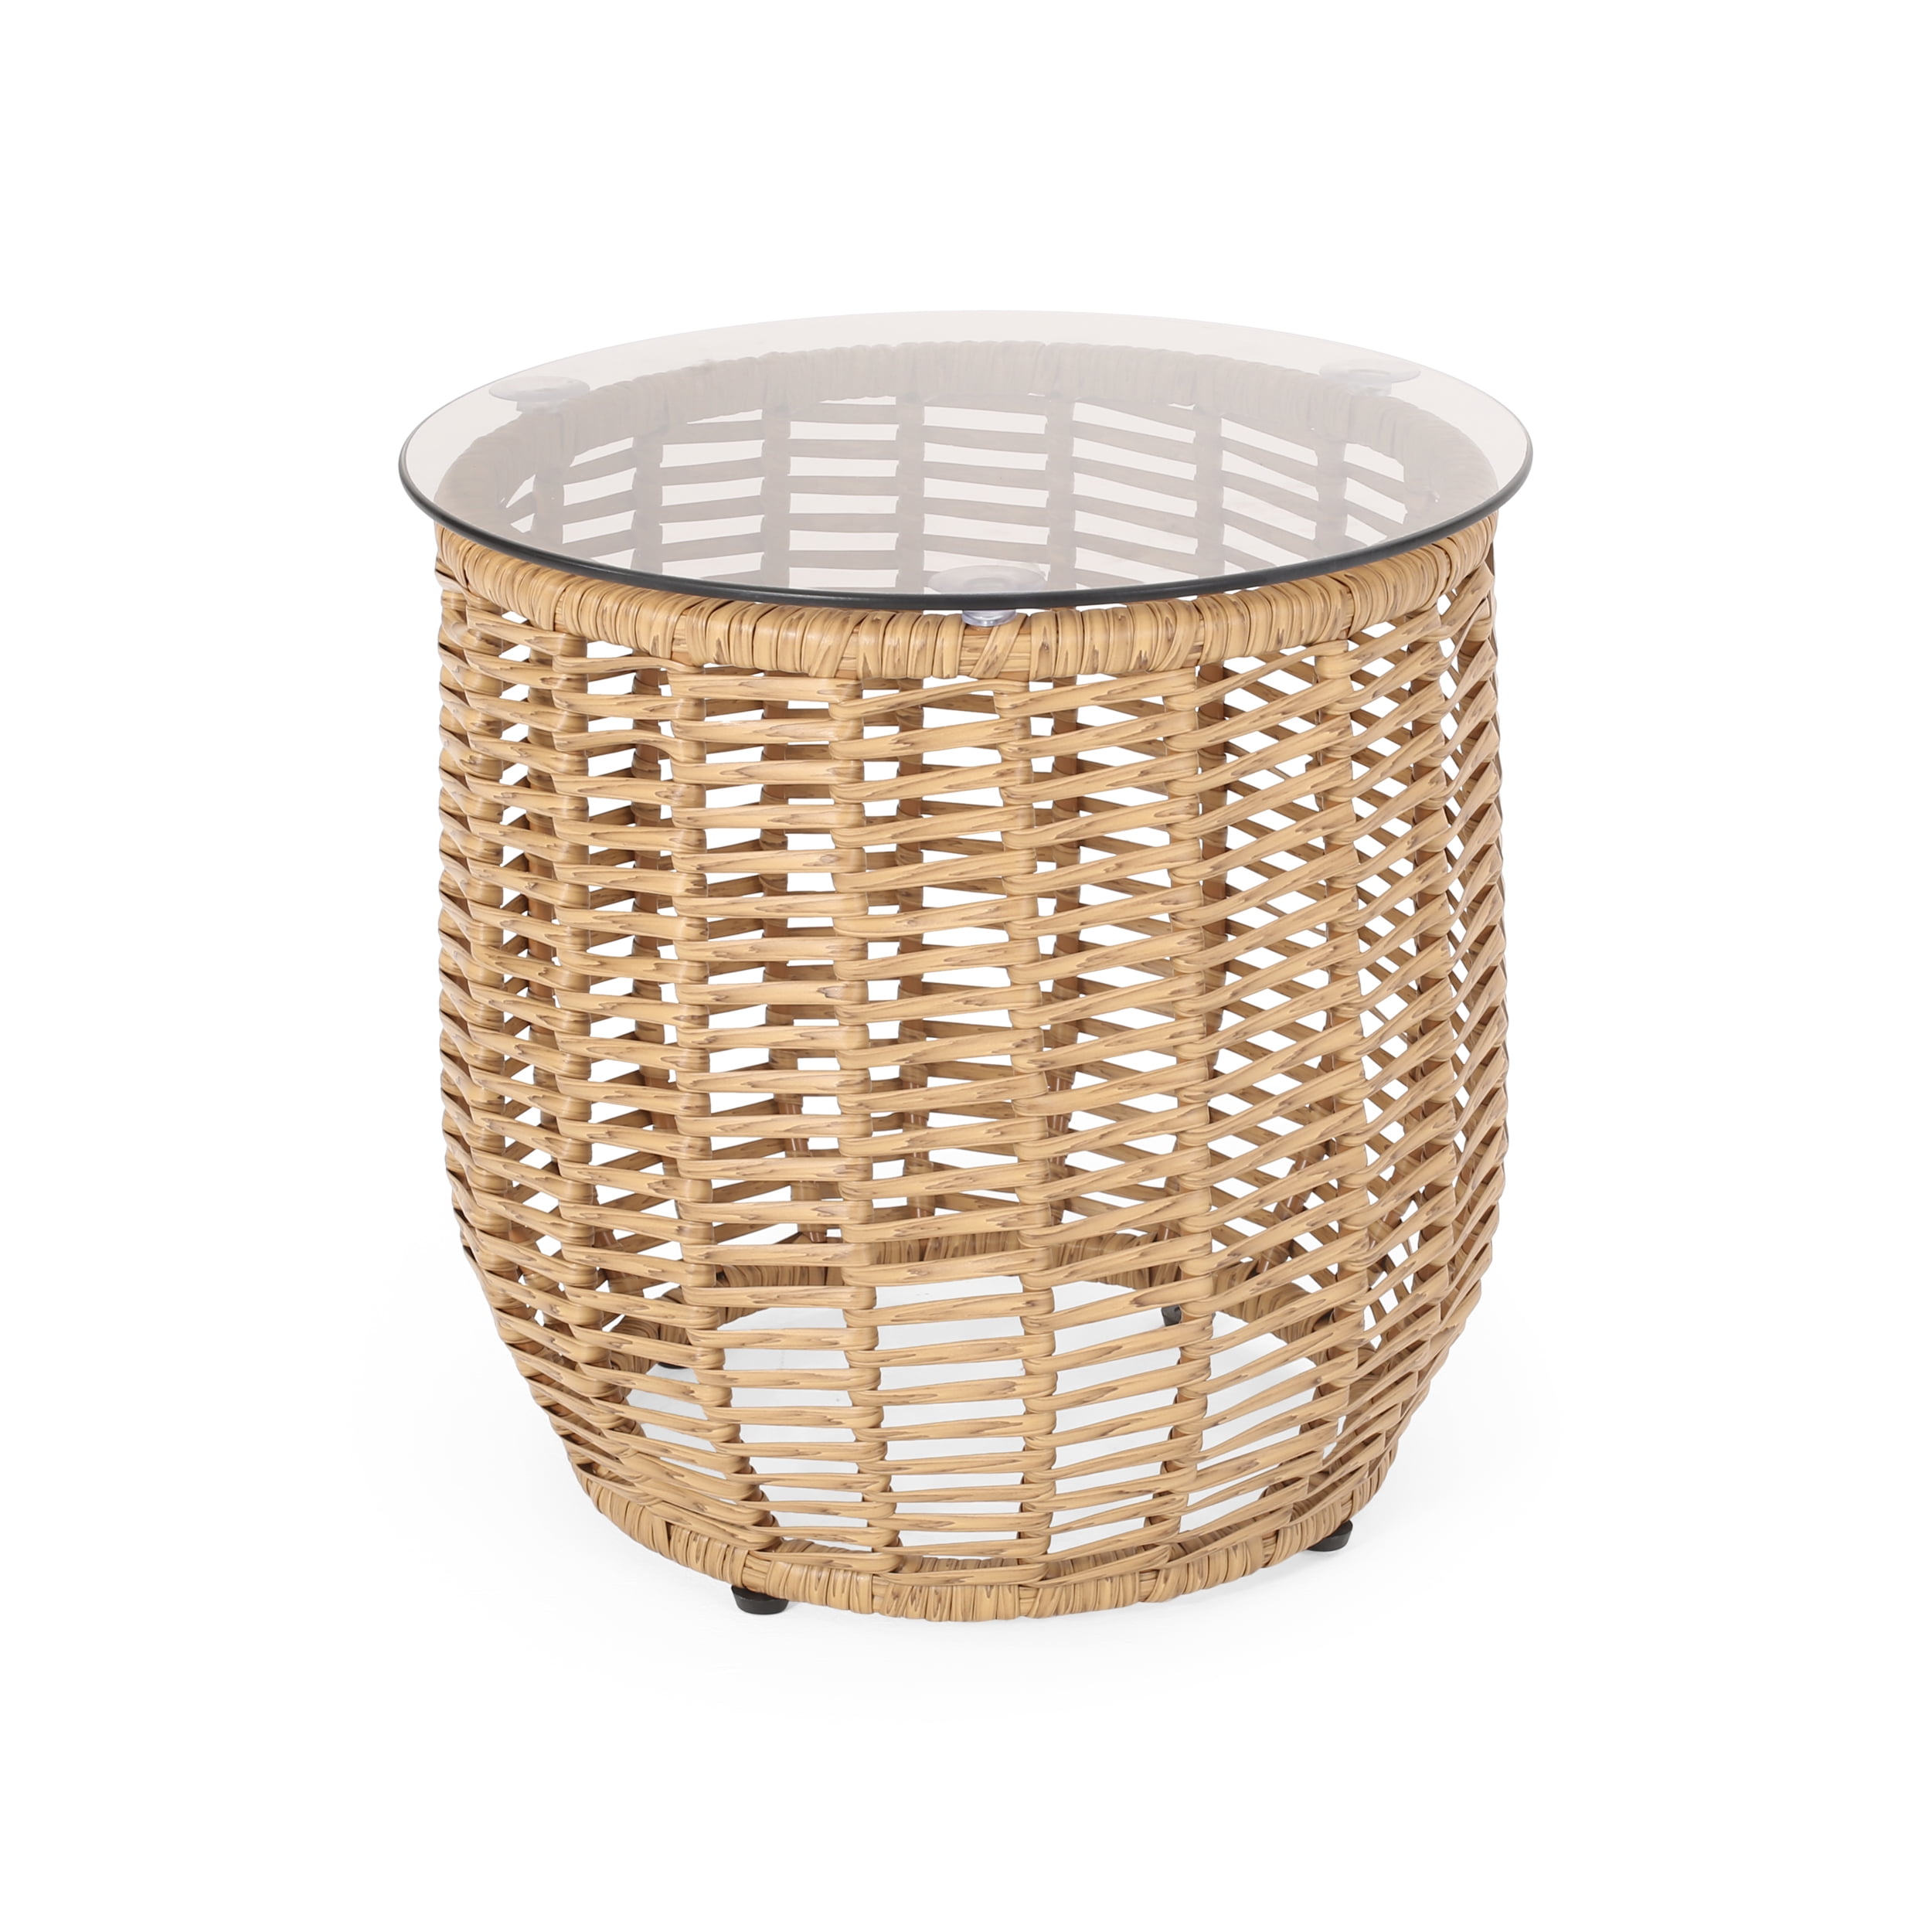 Kriday Wicker Side Table With Tempered, Wicker Side Table With Glass Top